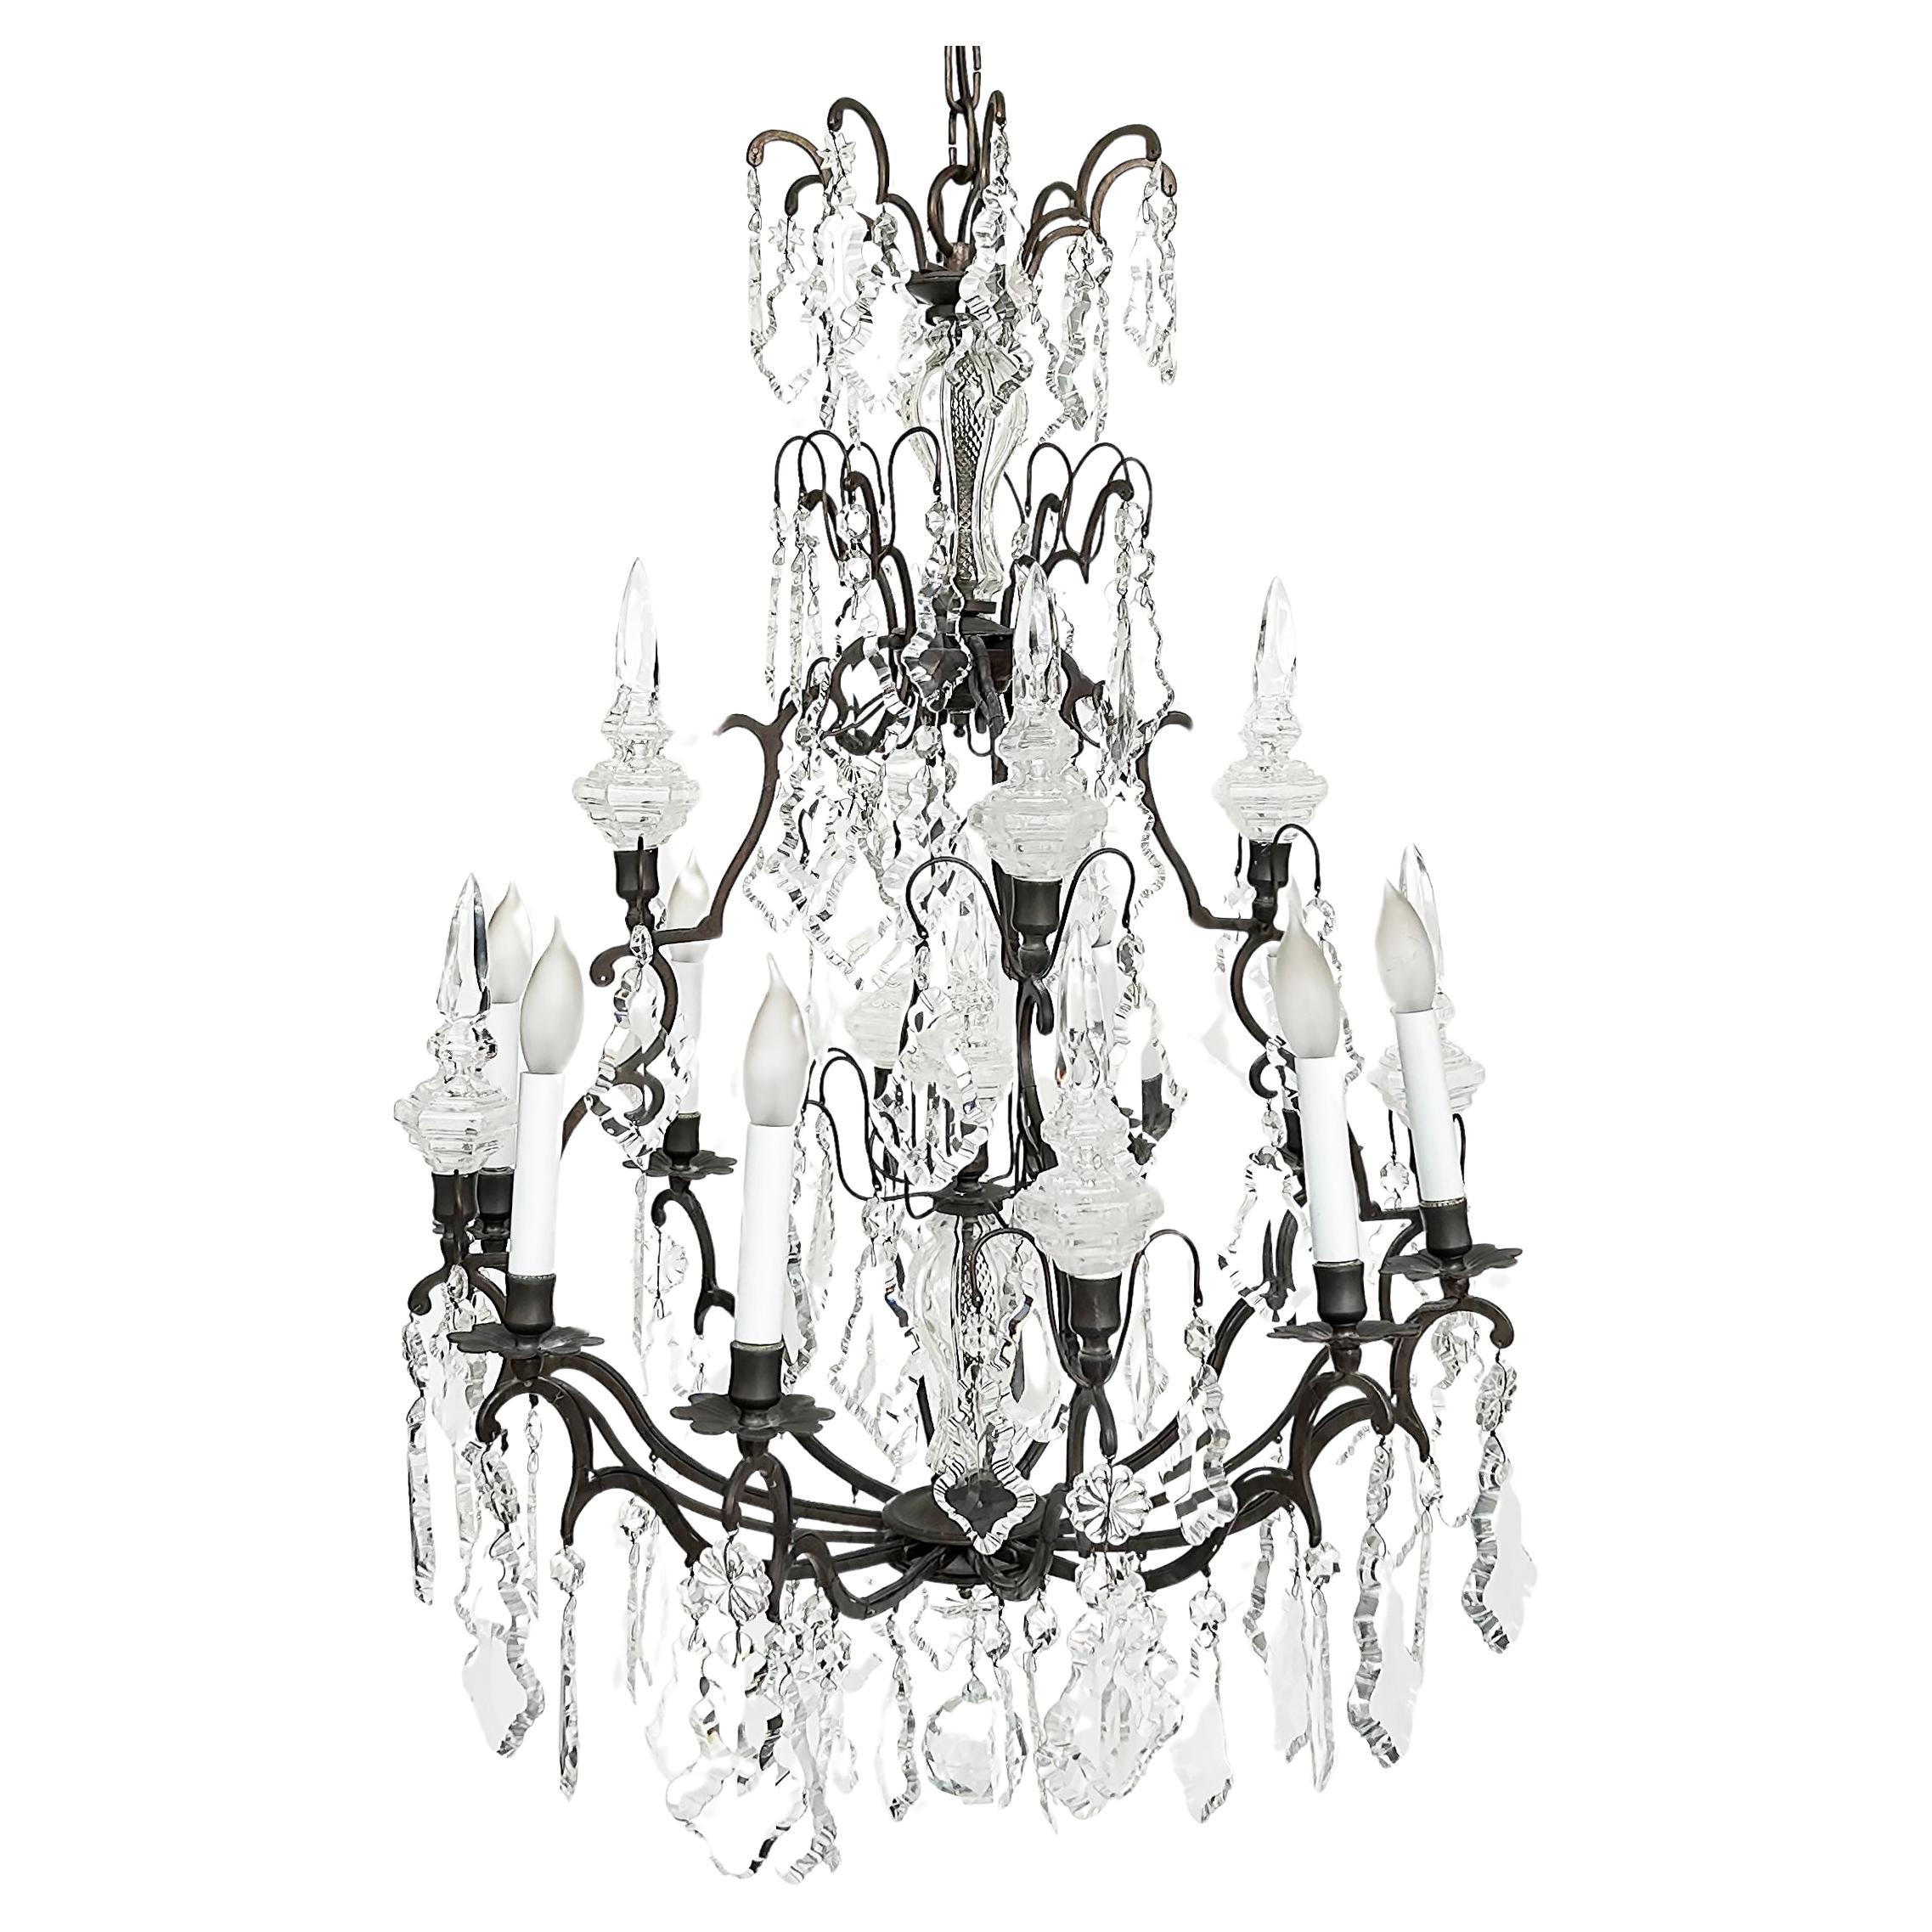 19th-Century French Louis XV Style Bronze Chandelier with Cut Crystal